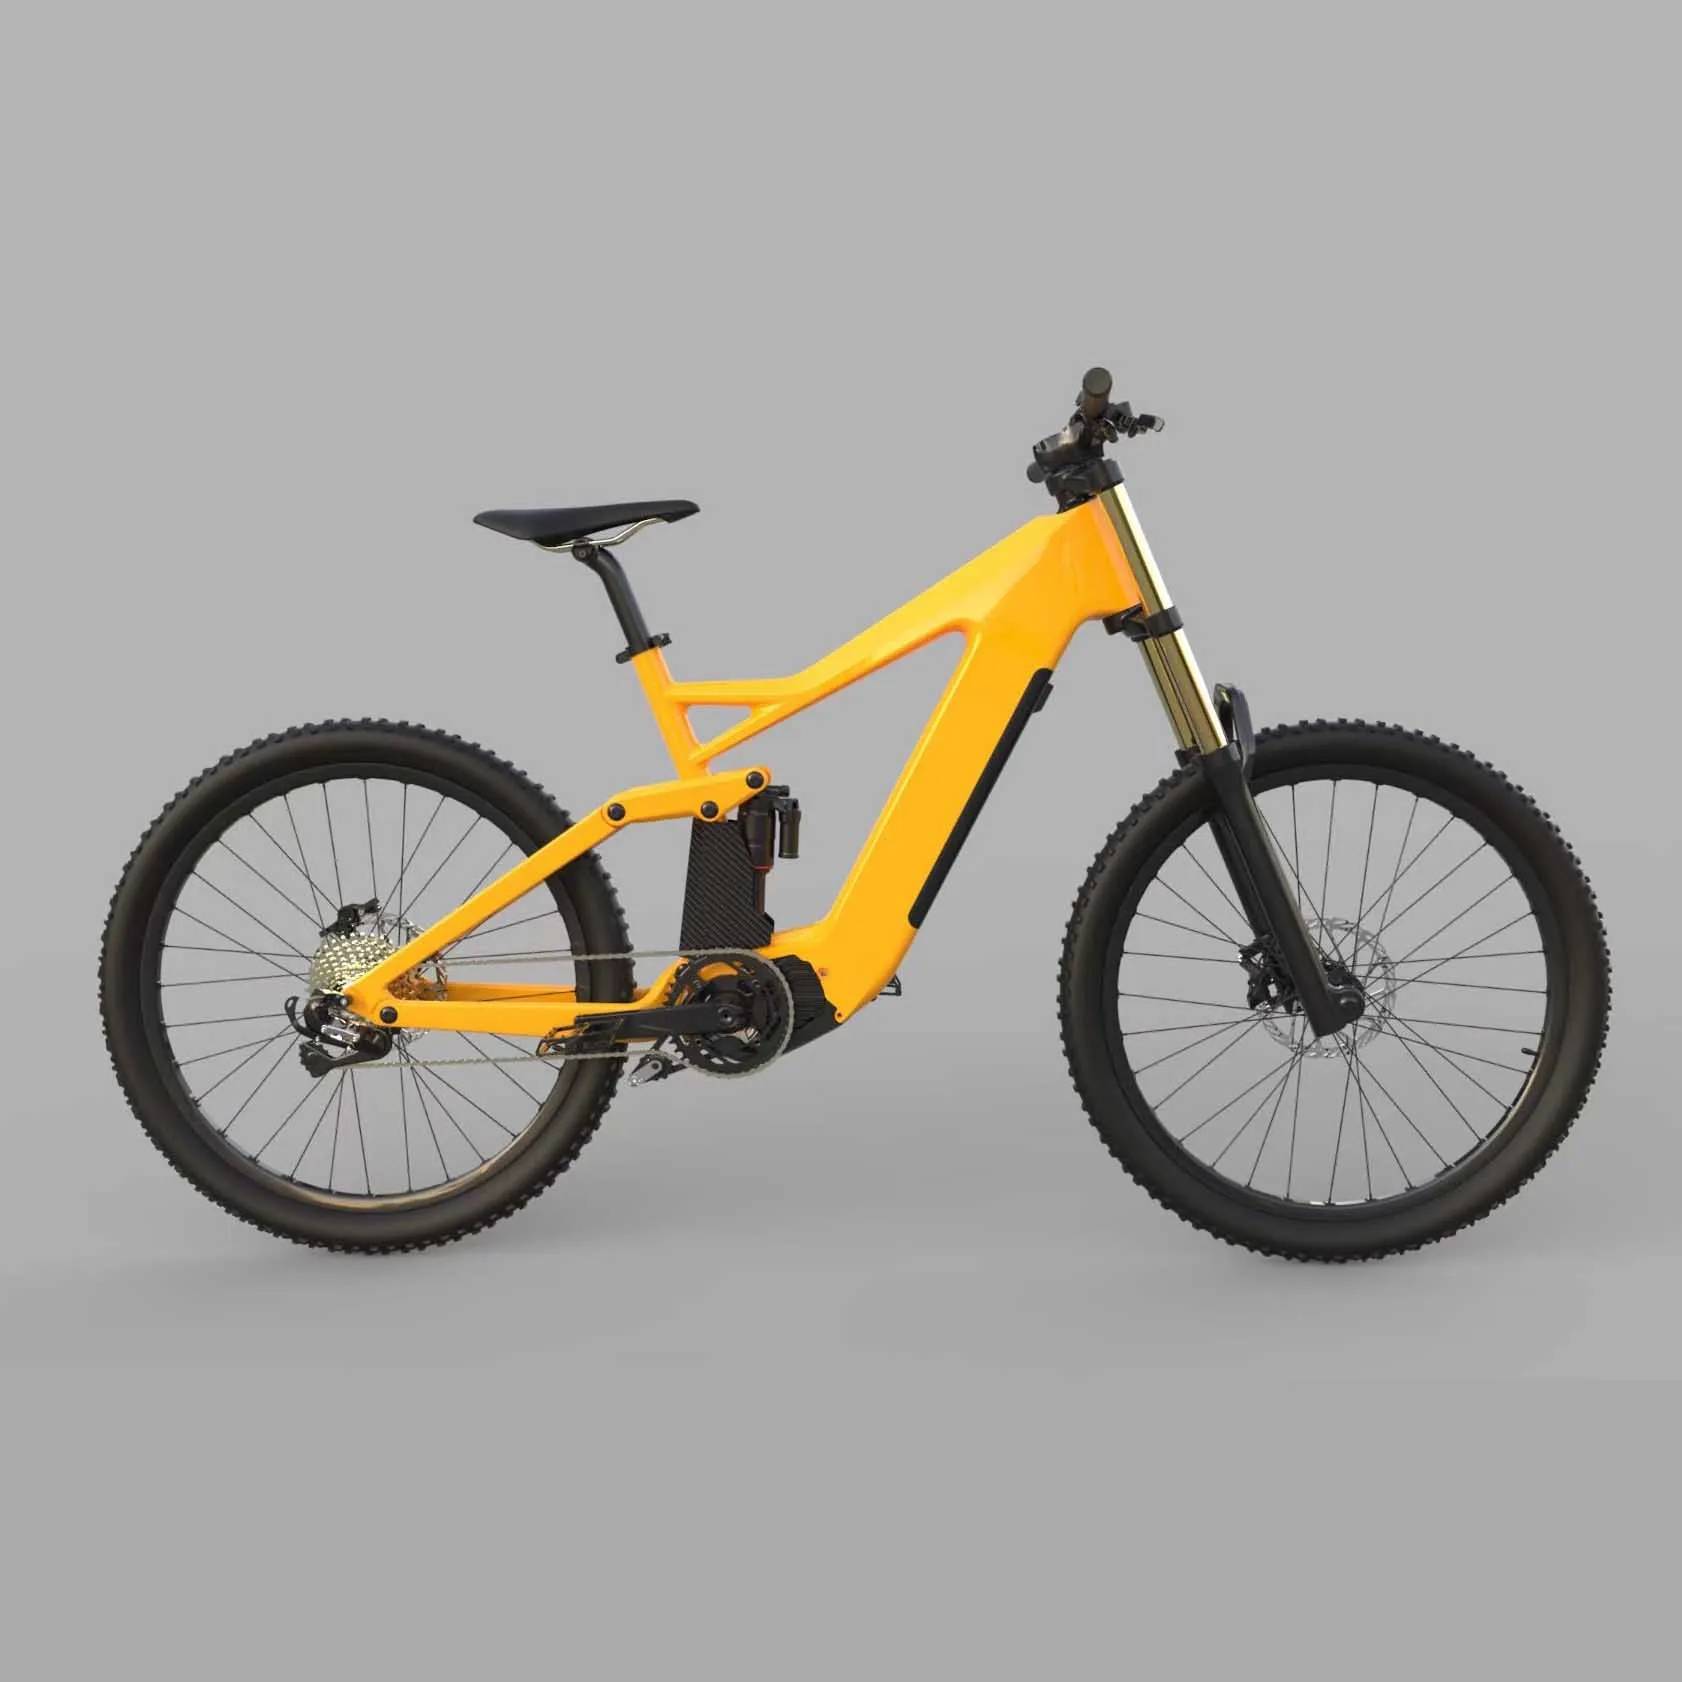 

2021 KONTAX Offer For Carbon Fiber 500 Bafang Mid Drive 500W Electric Mountain Bike Full Suspension eMTB Mountain ebike PRO, Customizable